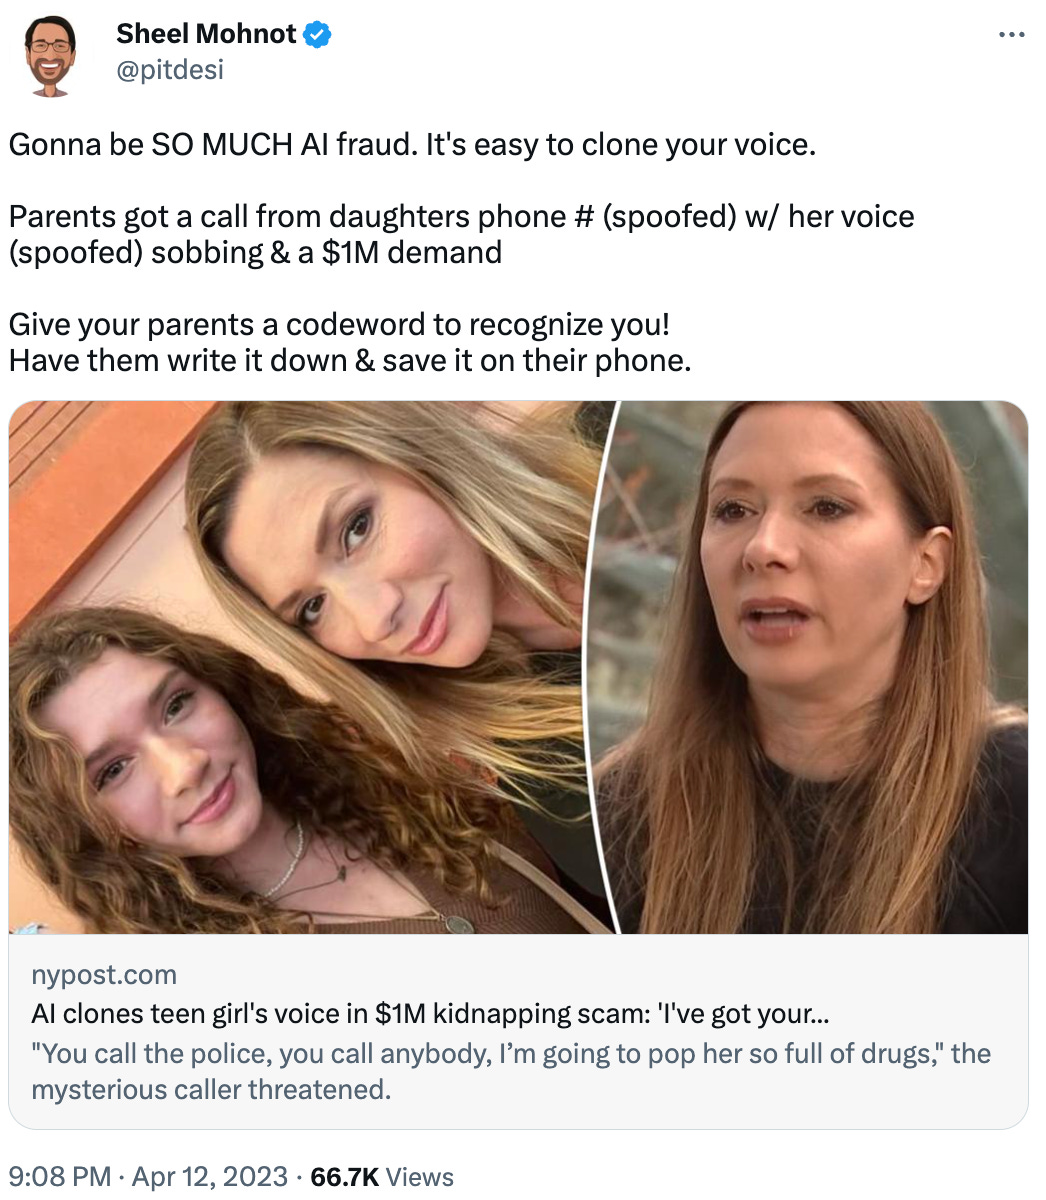 Gonna be SO MUCH AI fraud. It's easy to clone your voice.  Parents got a call from daughters phone # (spoofed) w/ her voice (spoofed) sobbing & a $1M demand  Give your parents a codeword to recognize you! Have them write it down & save it on their phone. nypost.com AI clones teen girl's voice in $1M kidnapping scam: 'I've got your... "You call the police, you call anybody, I’m going to pop her so full of drugs," the mysterious caller threatened.